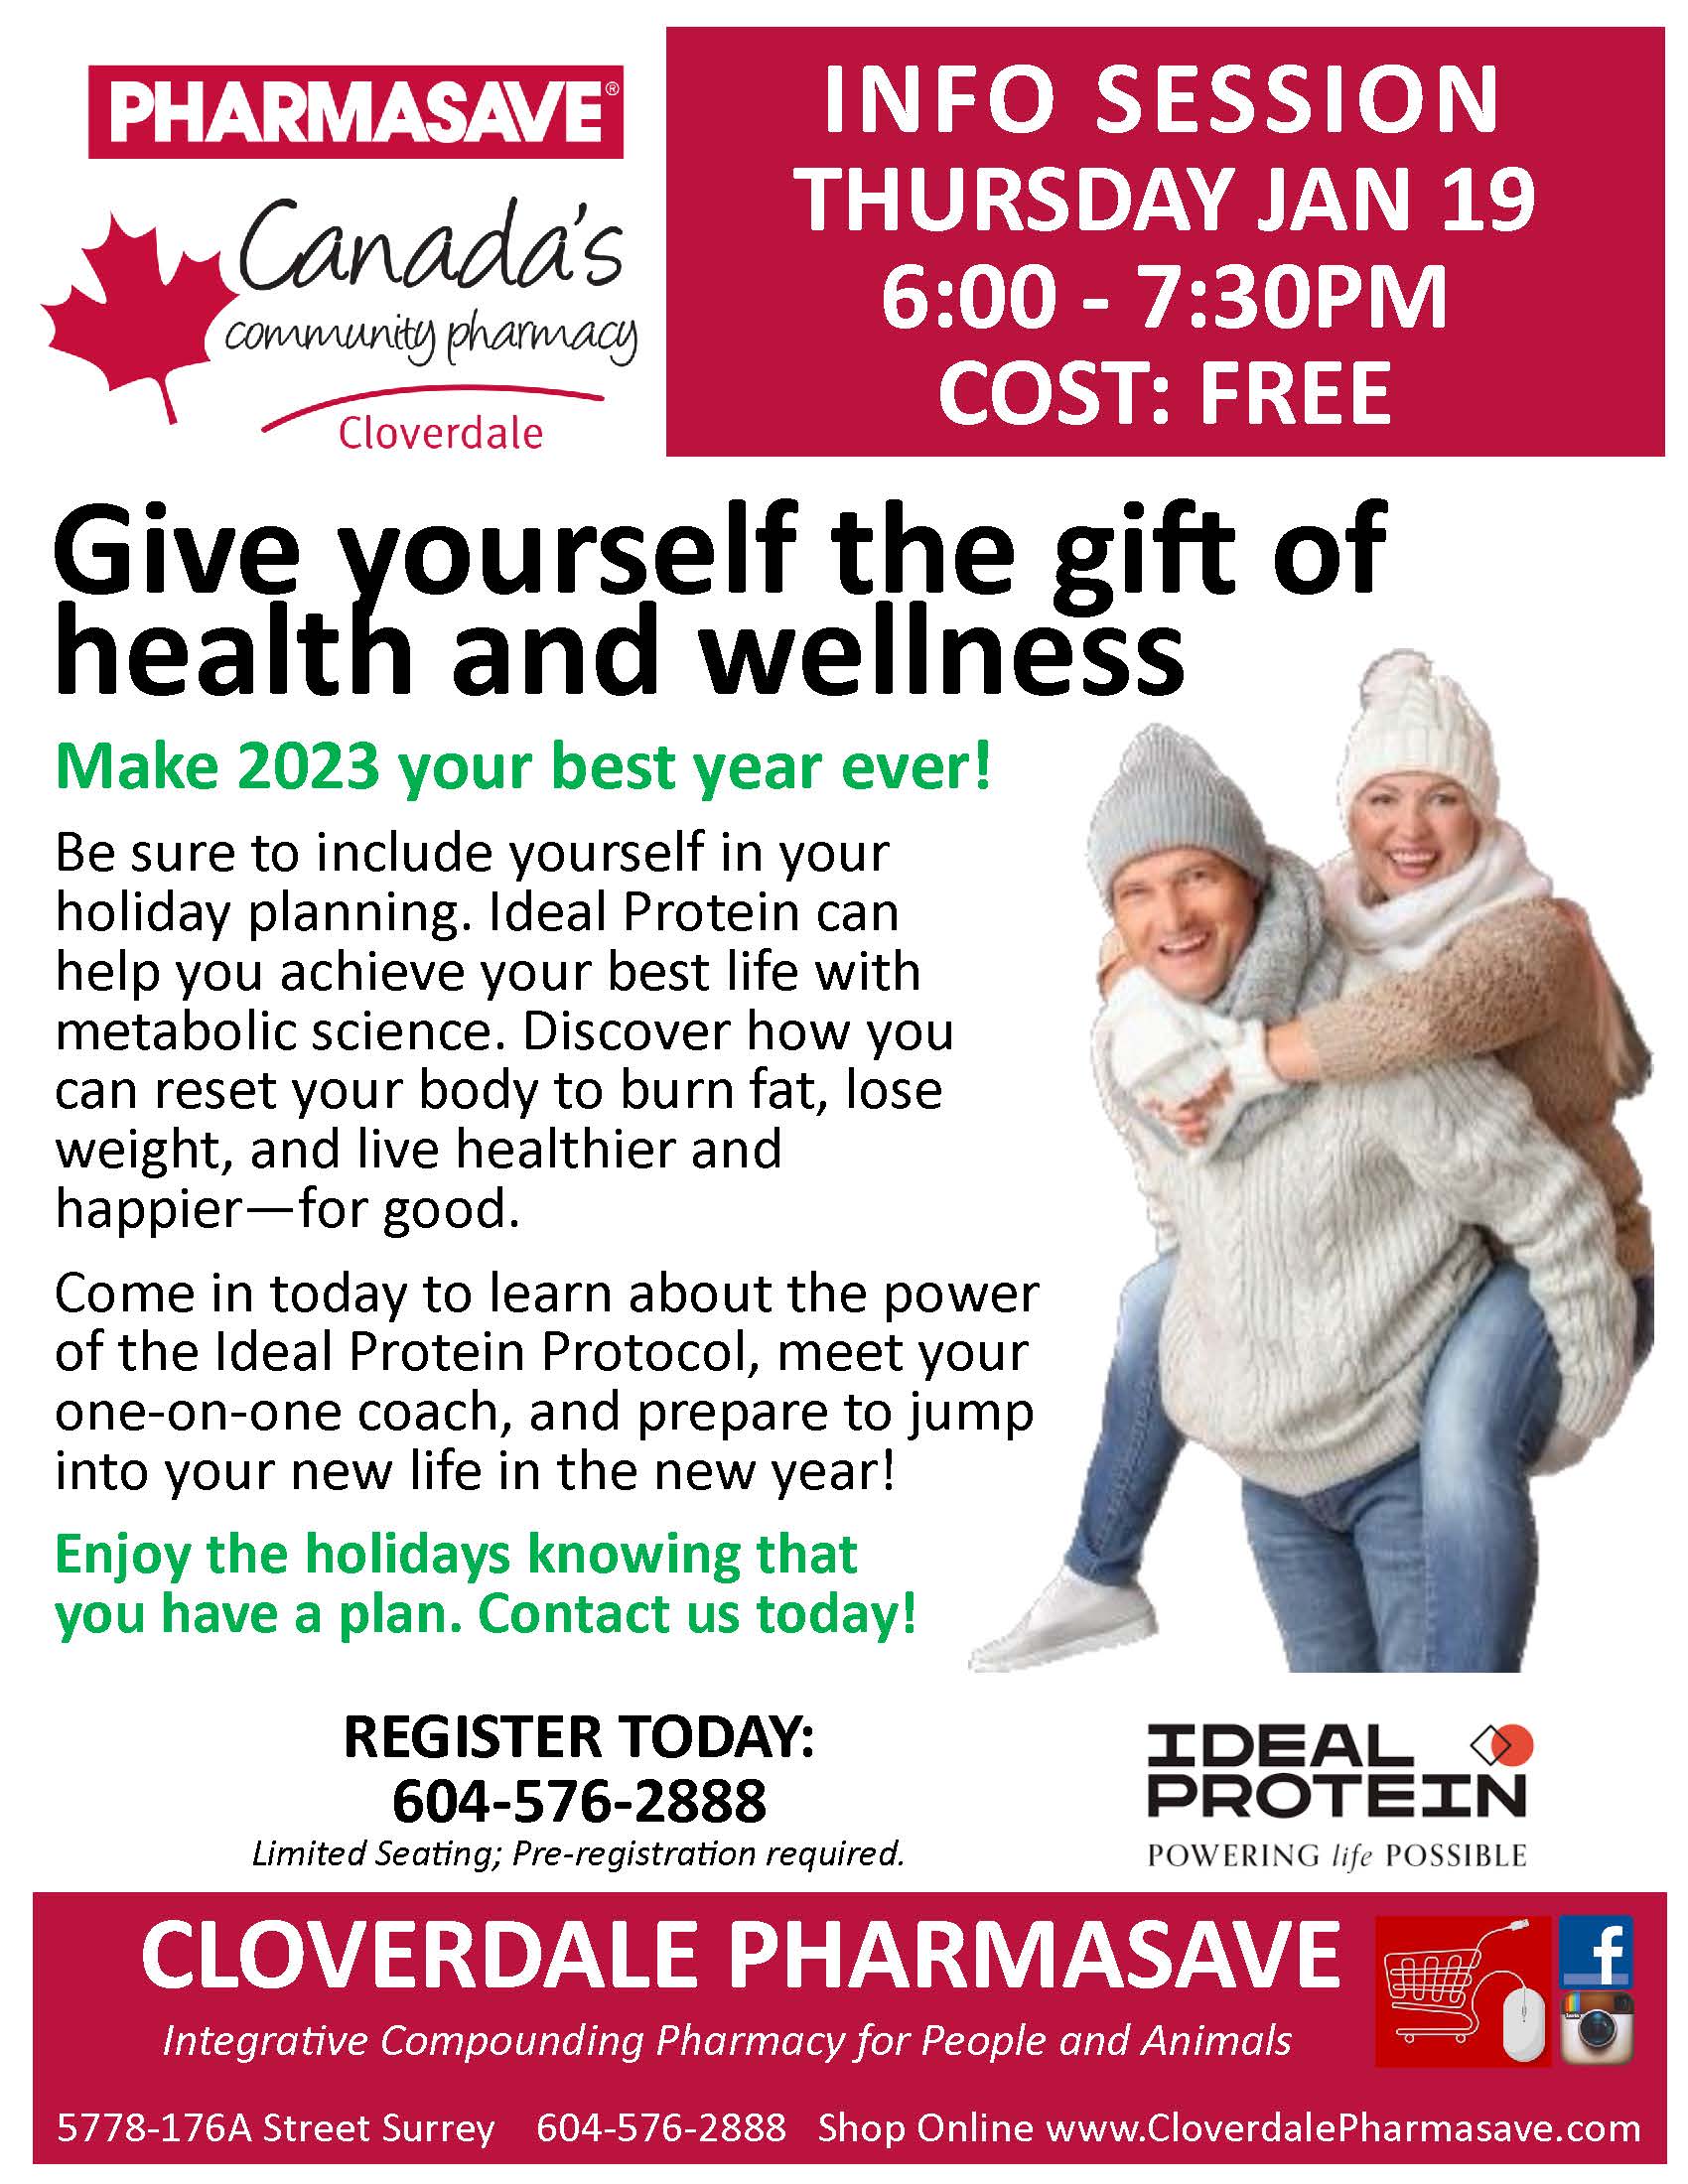 Ideal Protein Info Session. Give yourself the gift of health and wellness.